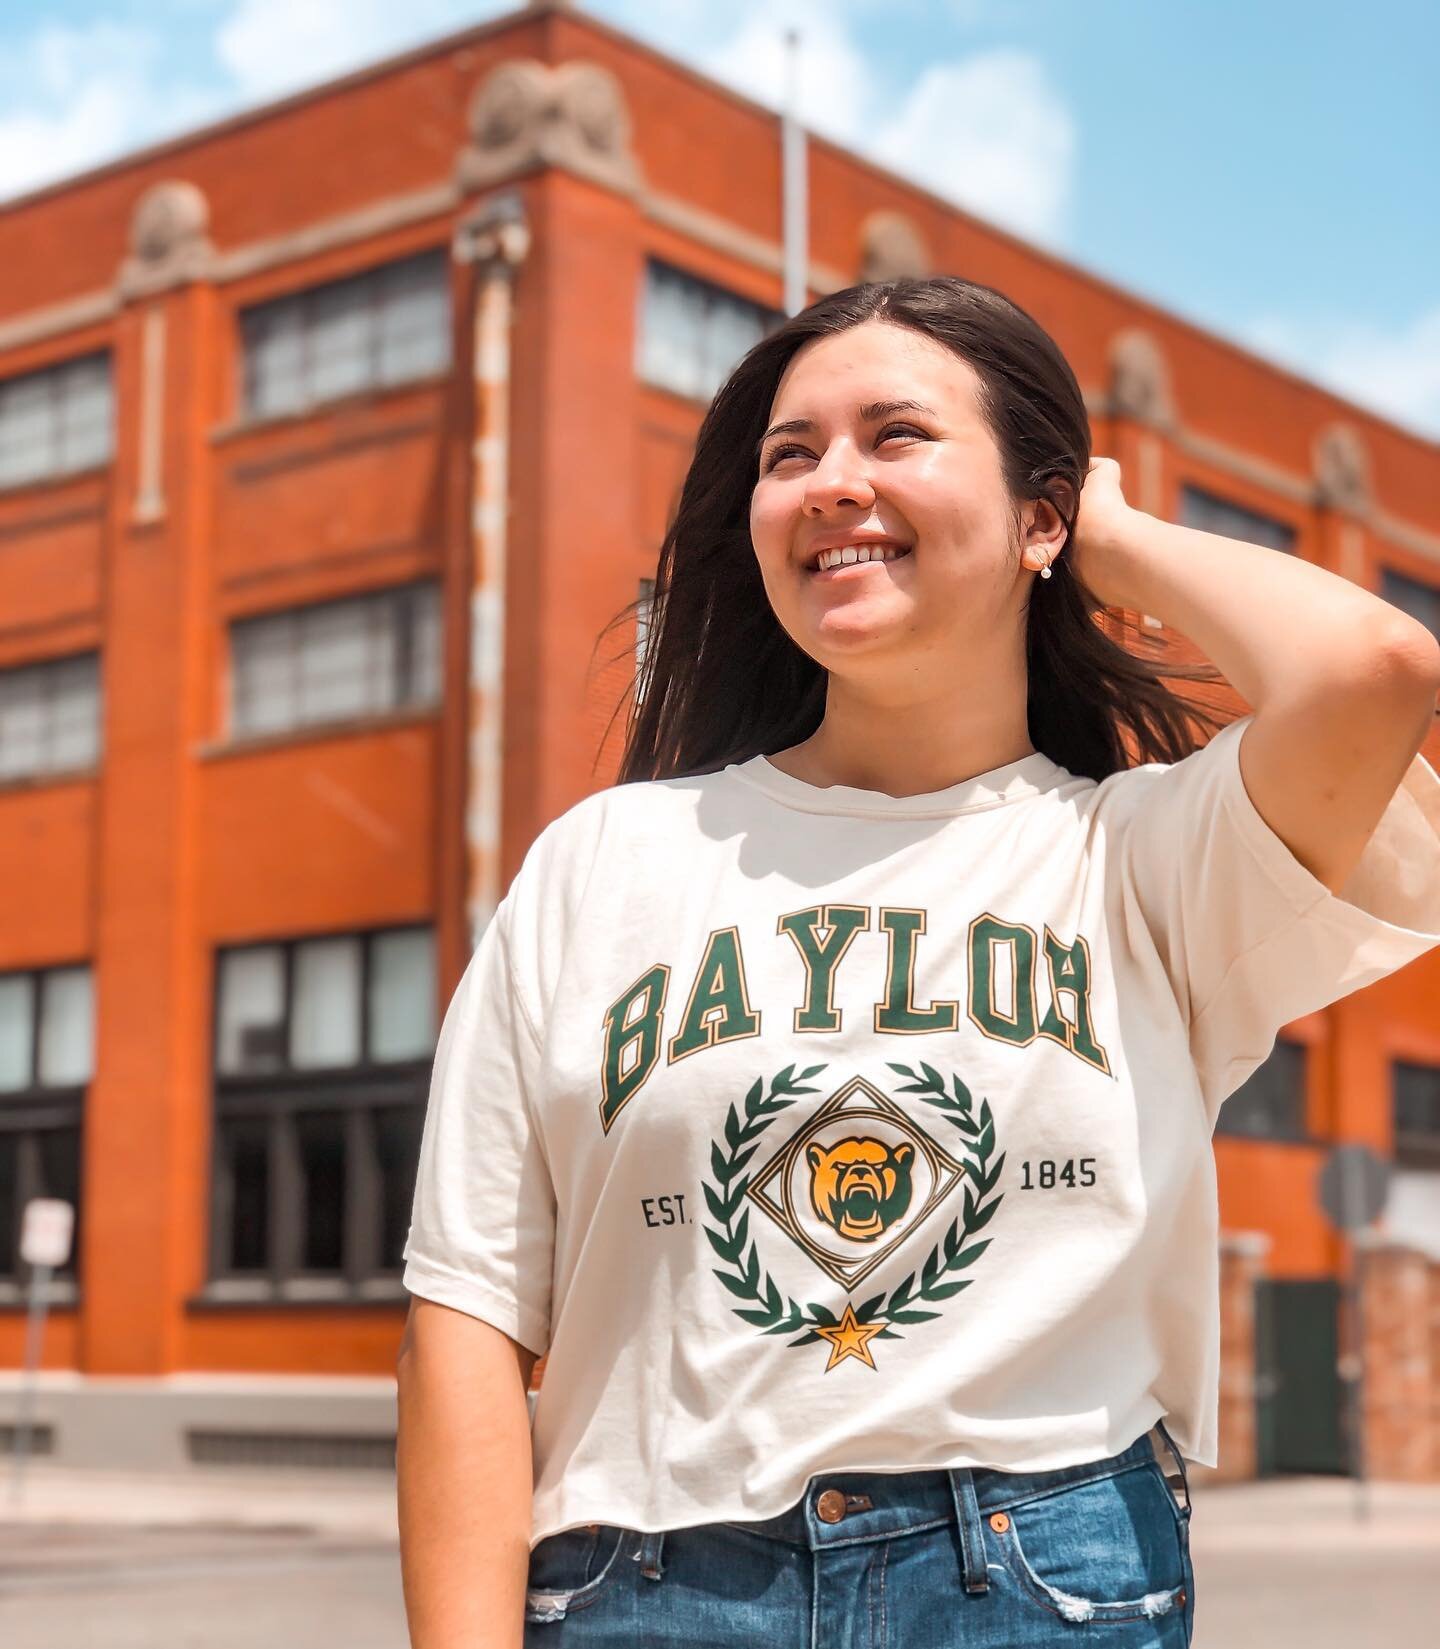 It&rsquo;s a beautiful day for some Baylor Football! 💛💚 🐻
We restocked all of our Est&amp;Co merch just in time for the game! We always sell out fast, so snag yours while you can! ✨
&bull;
&bull;
&bull;
&bull;
#showusyourgrae #graegirls #spicewaco